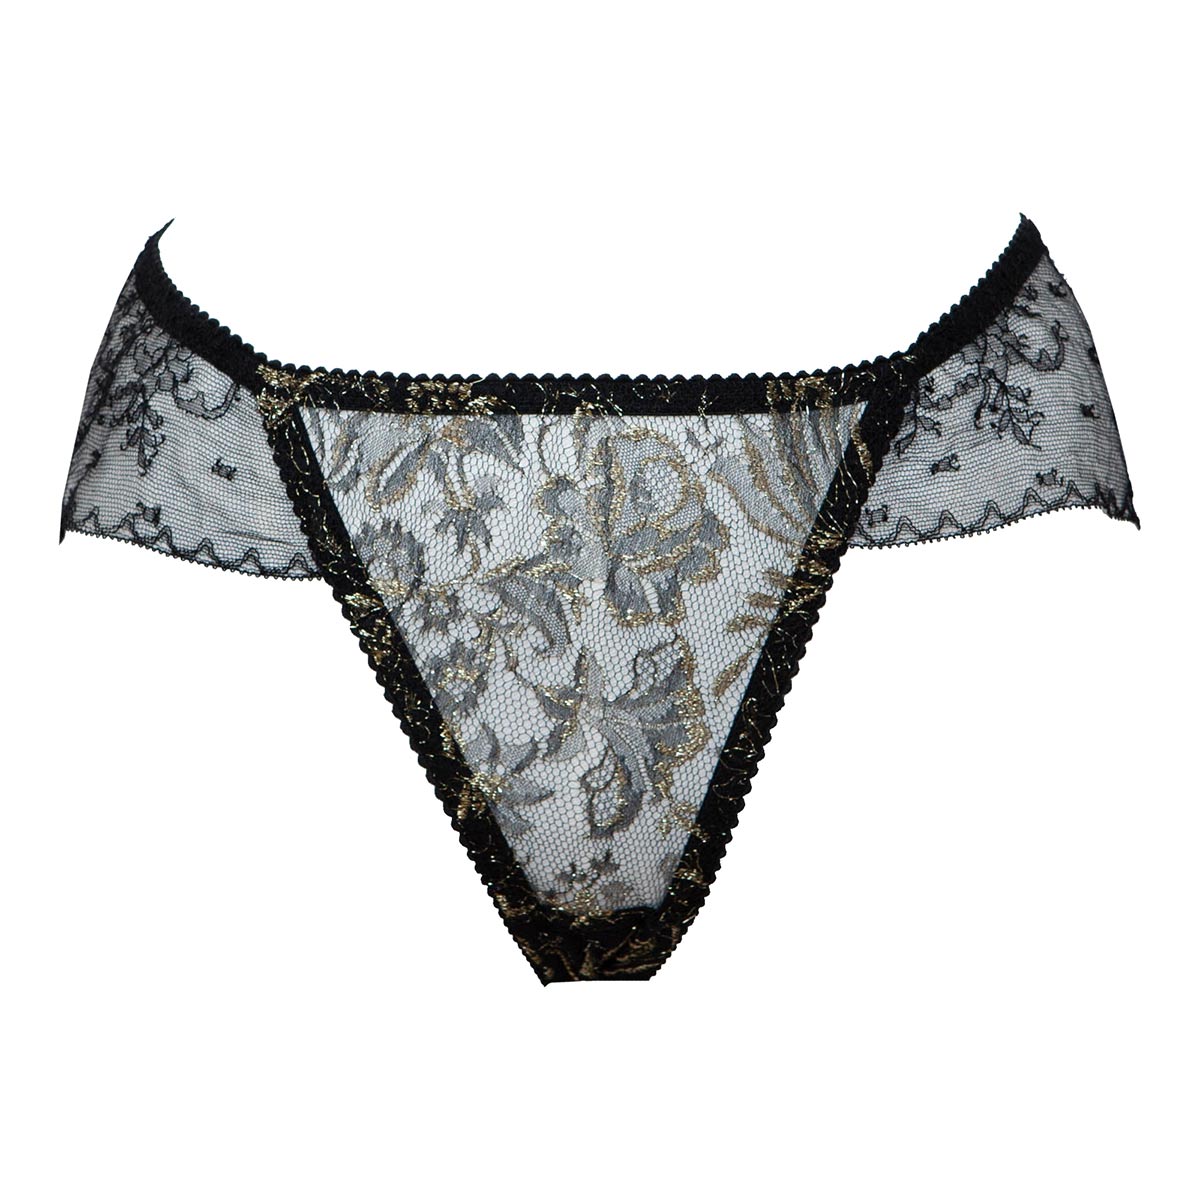 Black lace women underwear in french leavers lace. Made to order